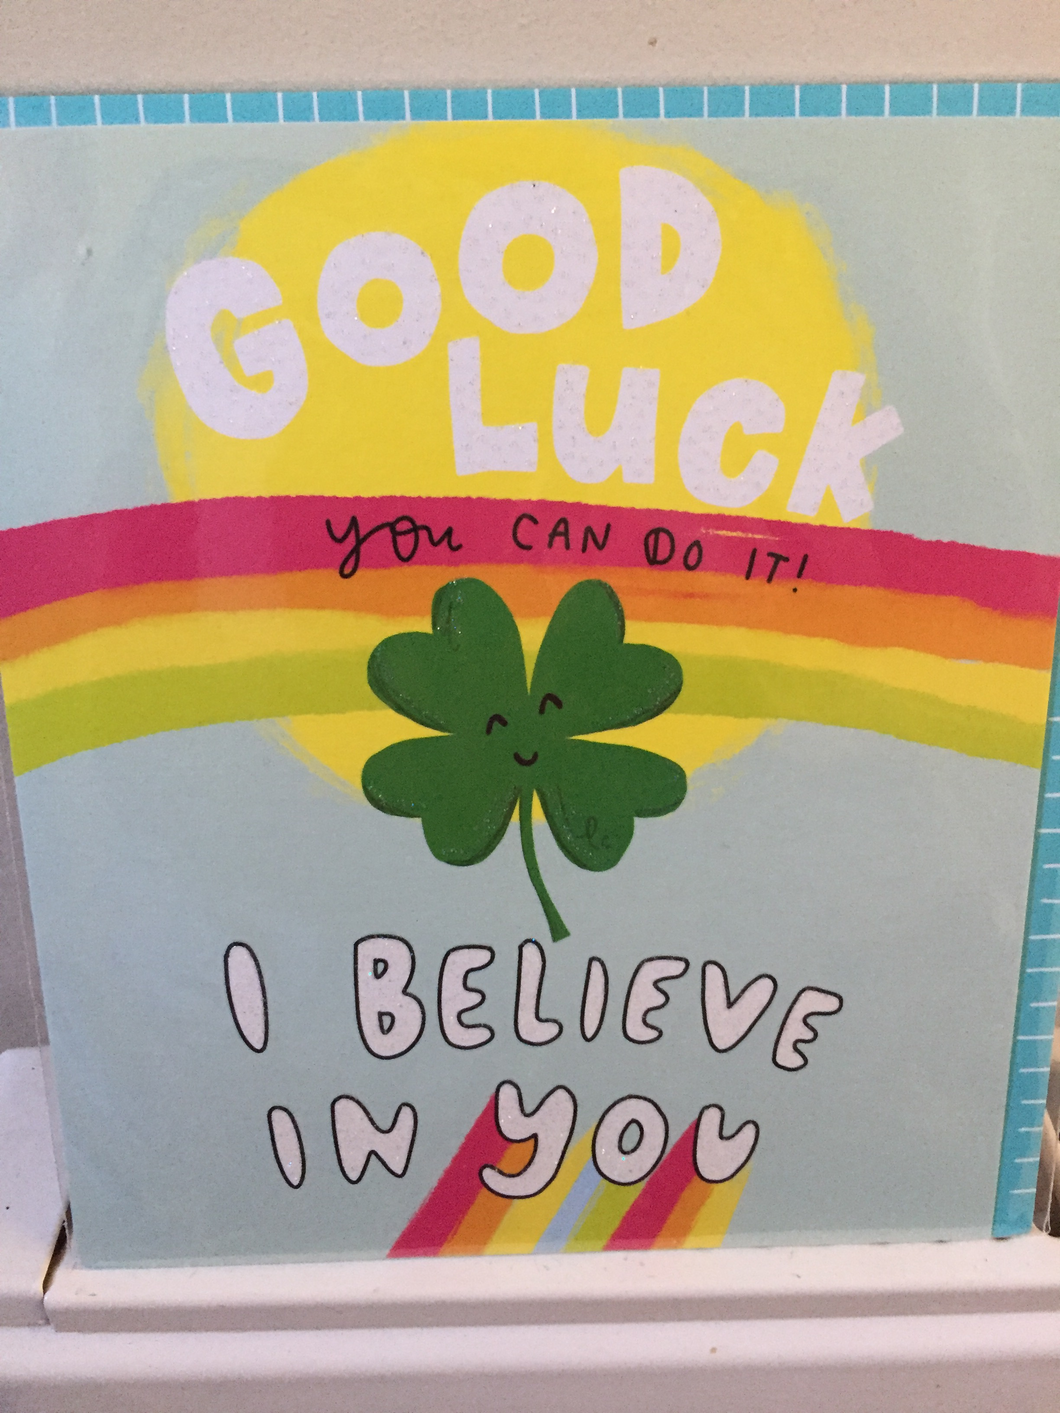 Good Luck - I believe in you - The Alresford Gift Shop